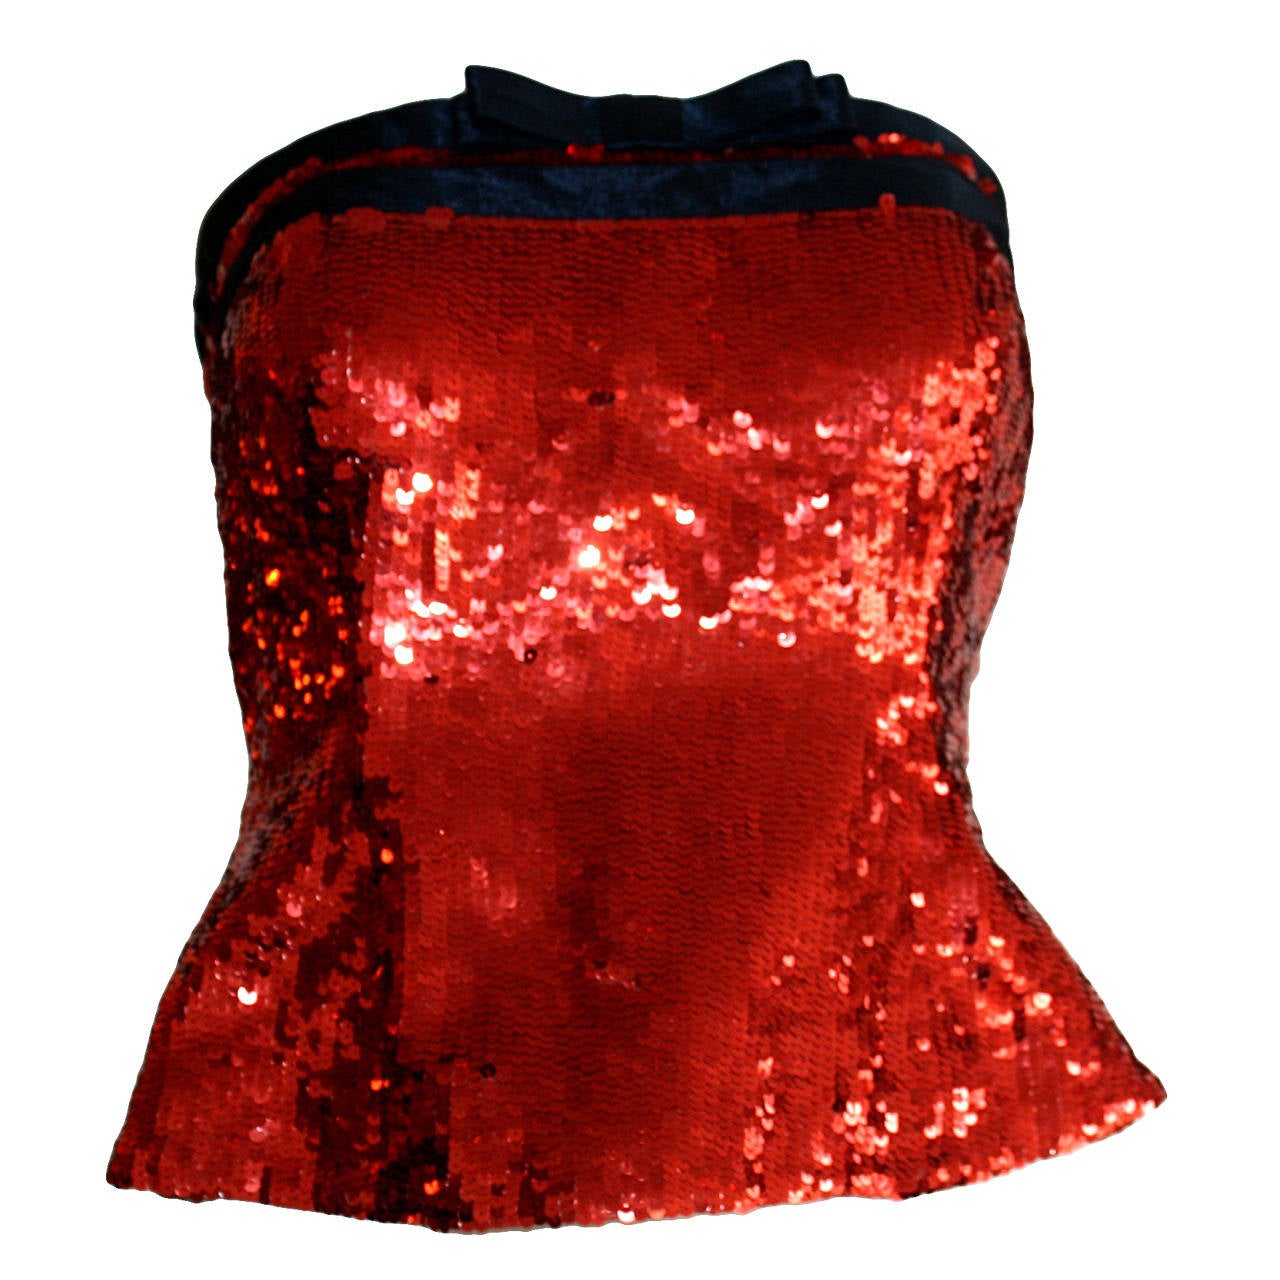 Brand New Vintage Bill Blass Red Sequin Bow Bustier Top